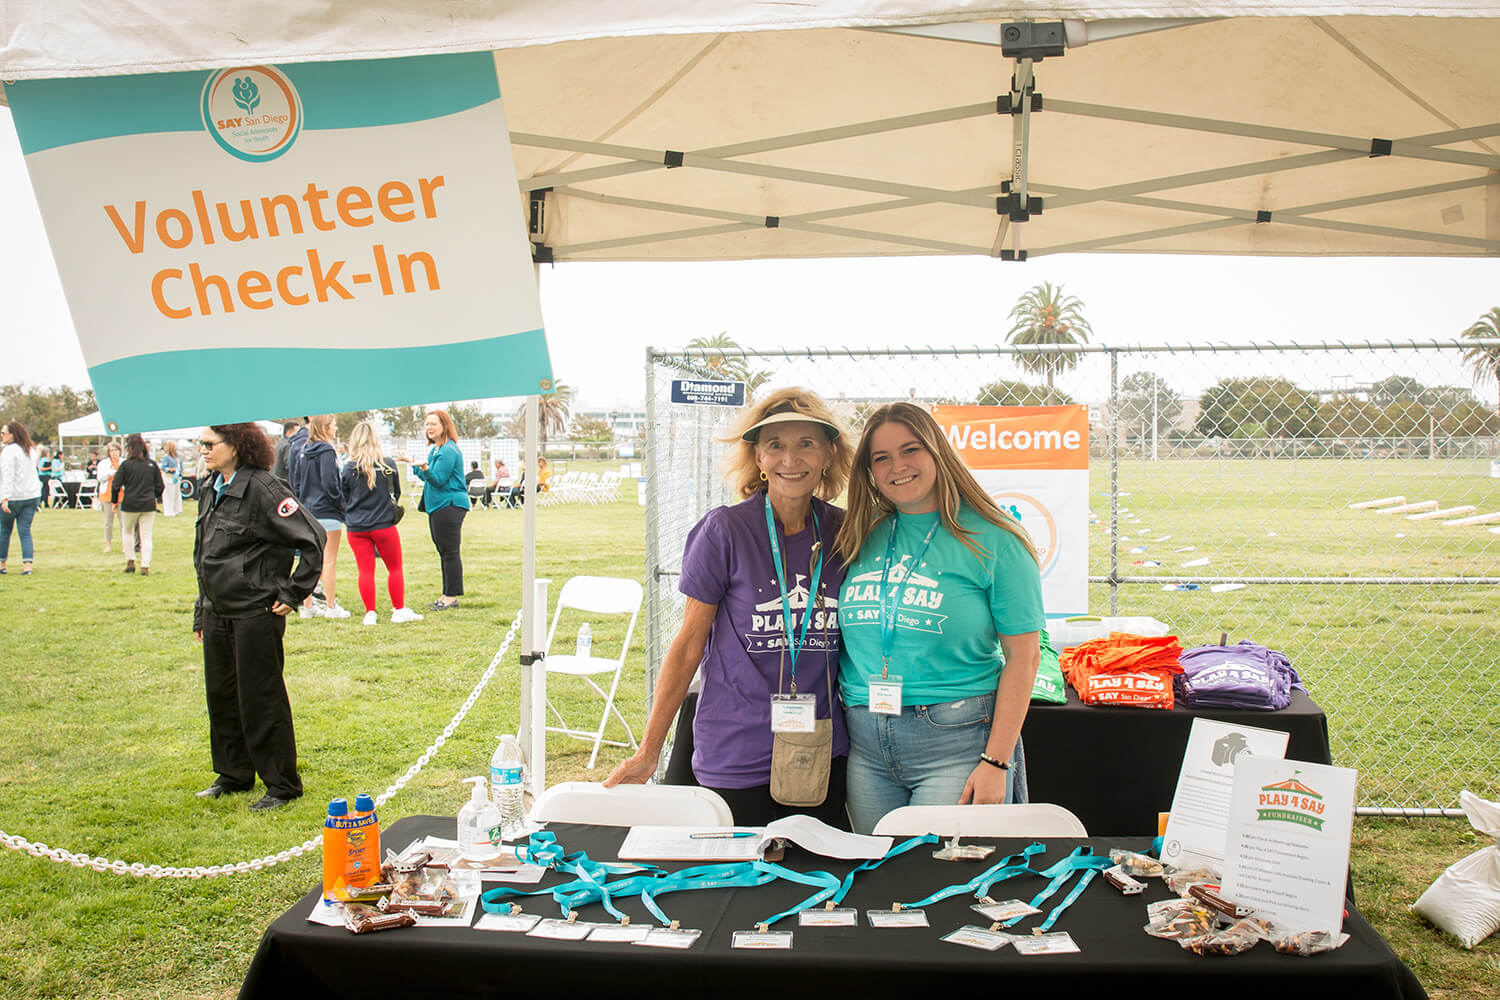 Two volunteers stand behind a check-in table under a tent labeled "Volunteer Check-In" at an outdoor San Diego event. The table holds name tags, snacks, and promotional materials. People and a grassy field are in the background.